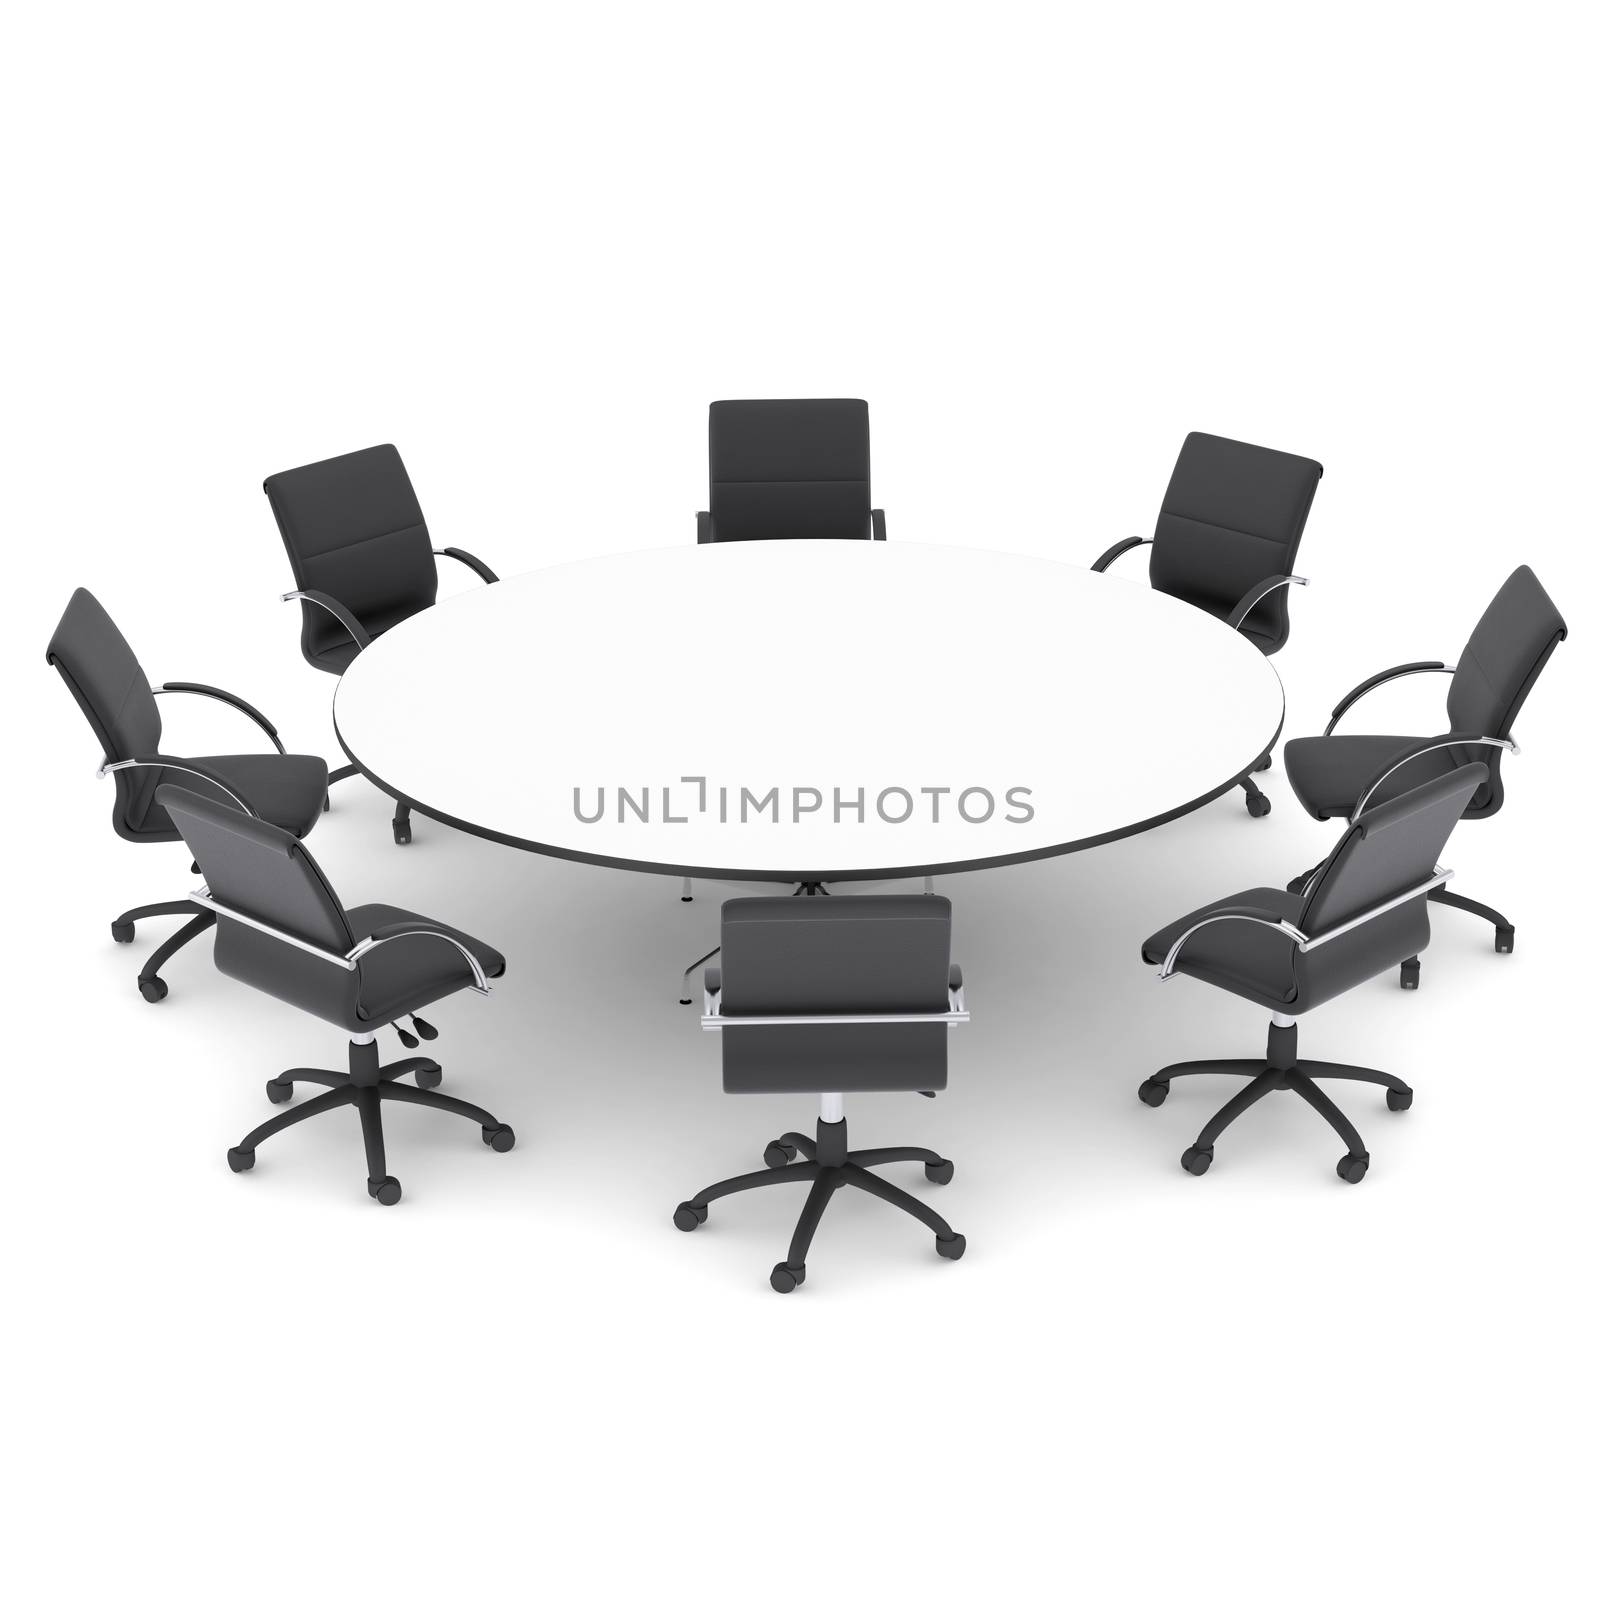 Office chairs and round table. Isolated render on a white background